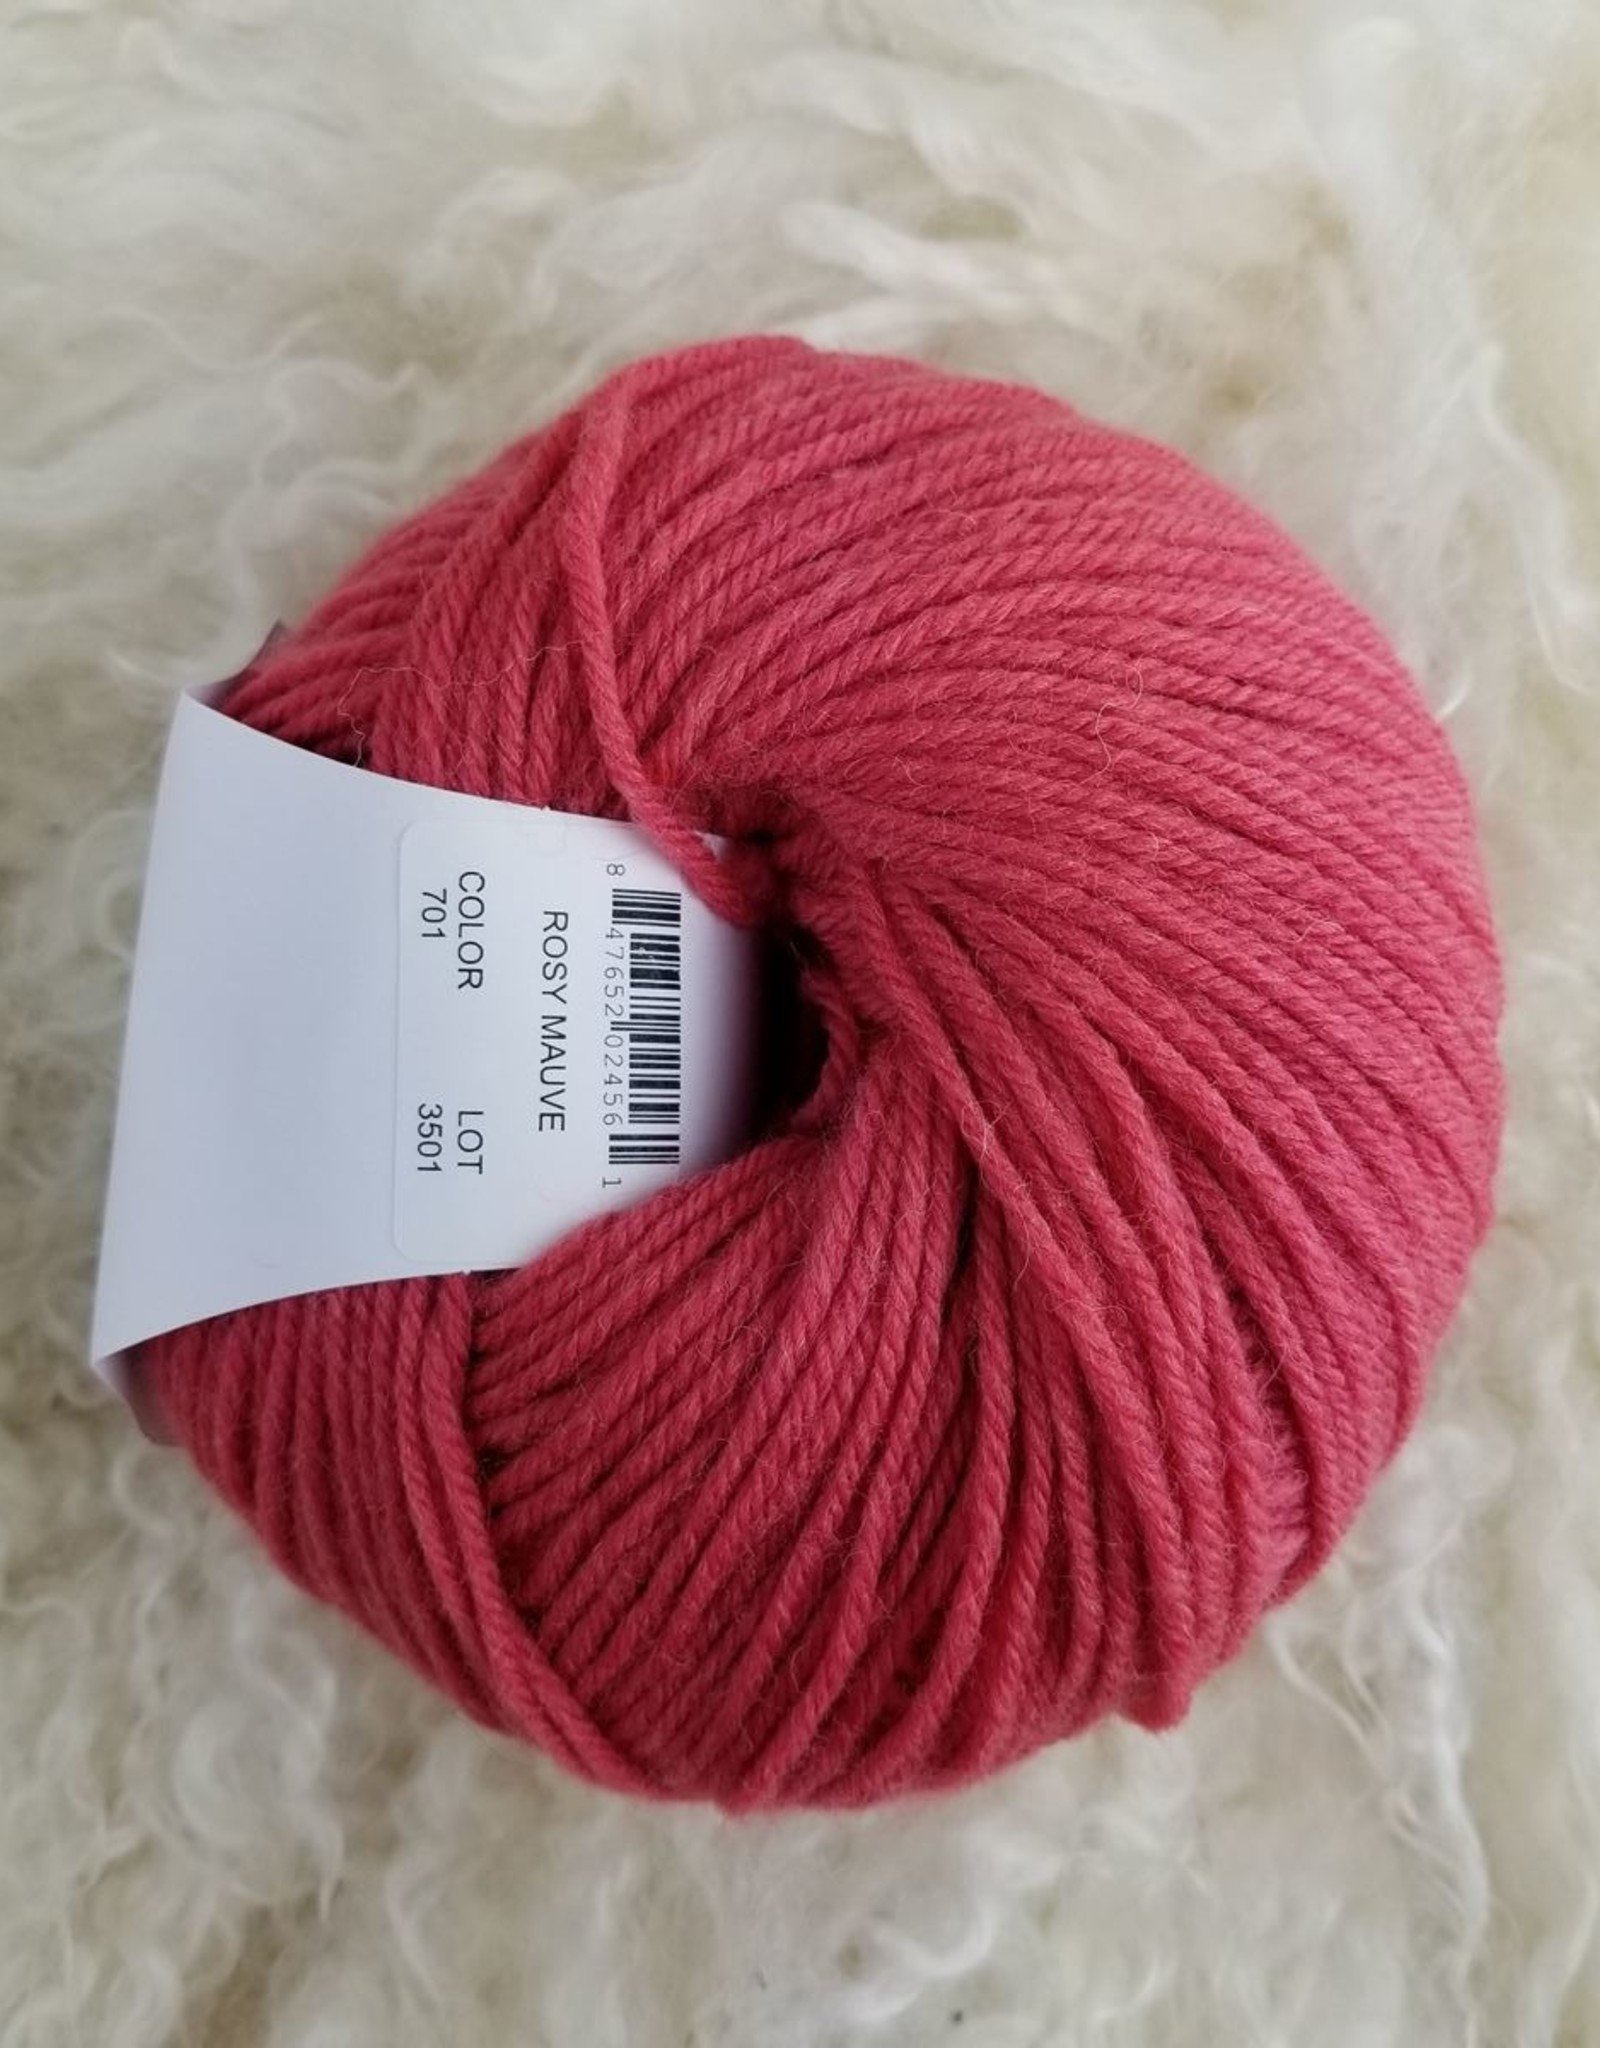 Universal Yarns Deluxe Worsted SW 100g 701 rosy mauve